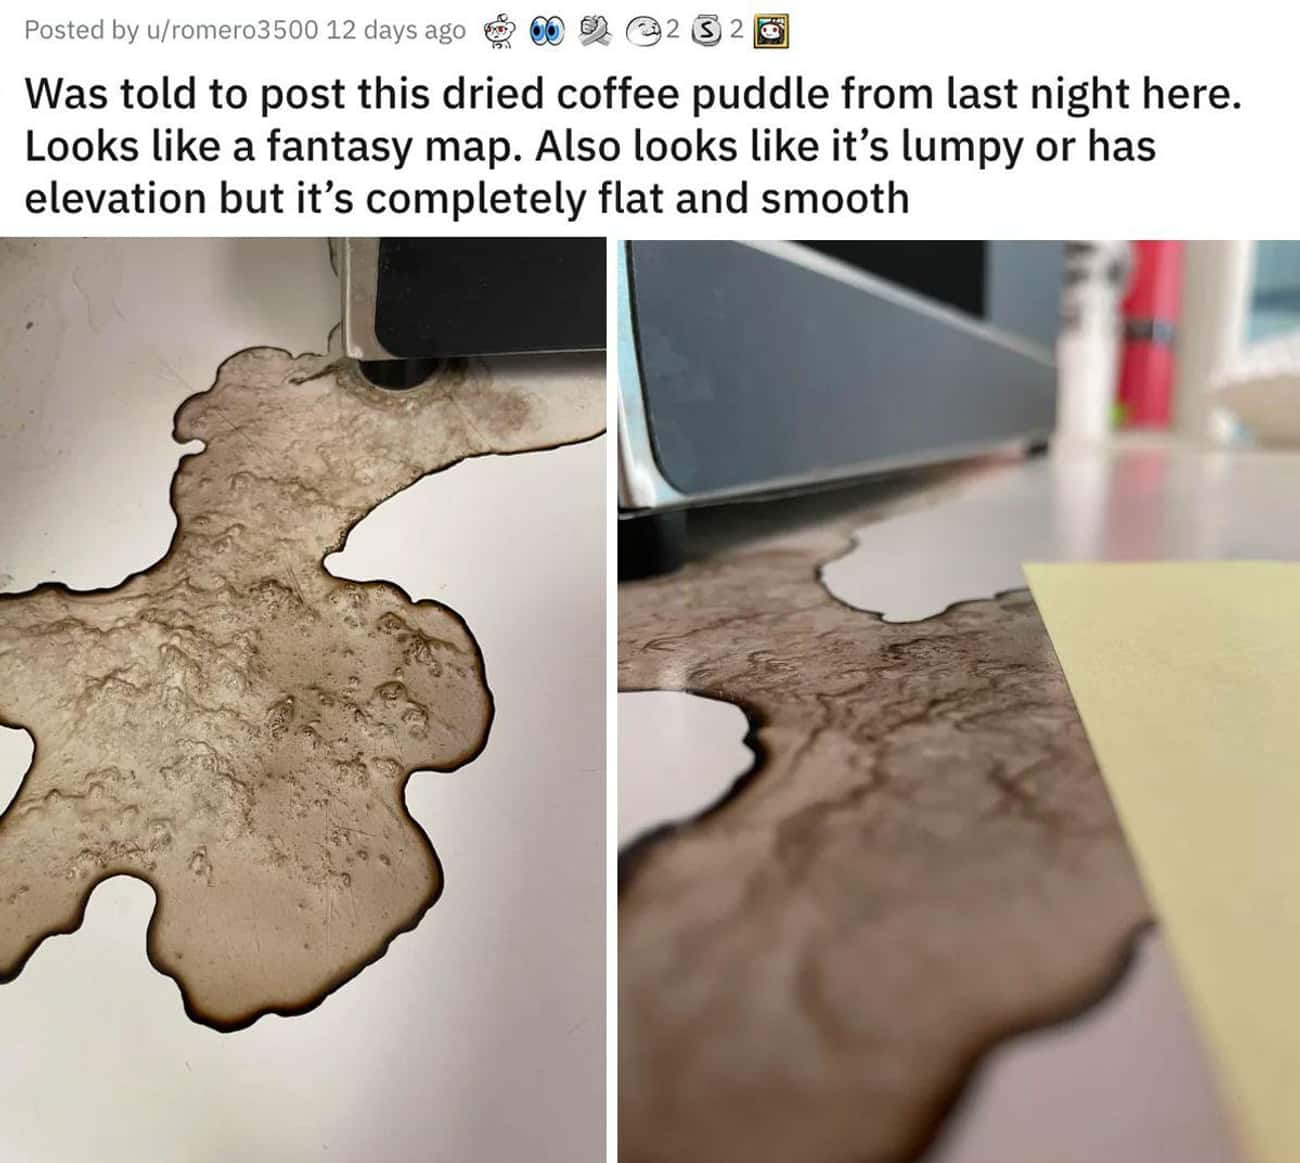 Dried Coffee Gives Illusions Of Depth